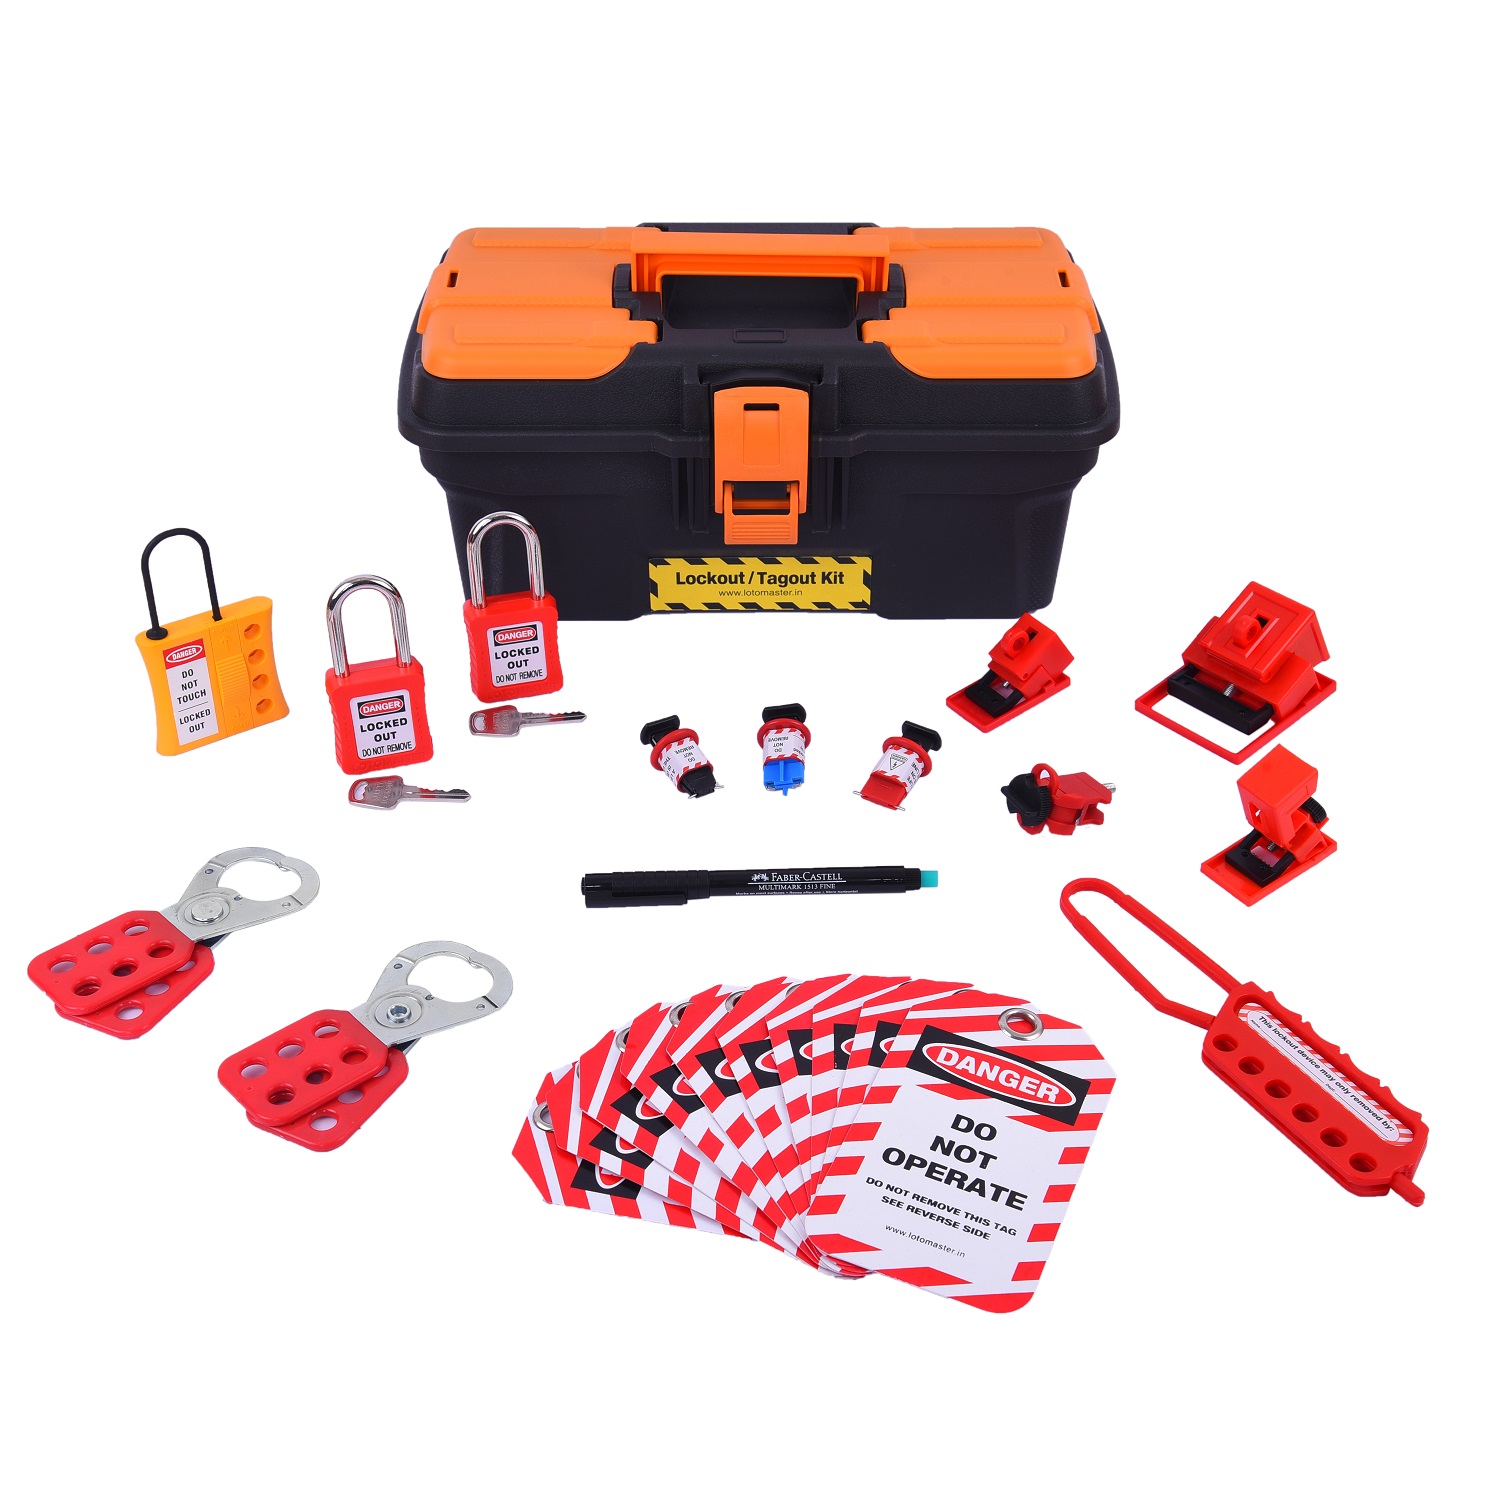 Basic Electrical Loto Kit - Delivery to Ireland, UK, Sweden, Finland